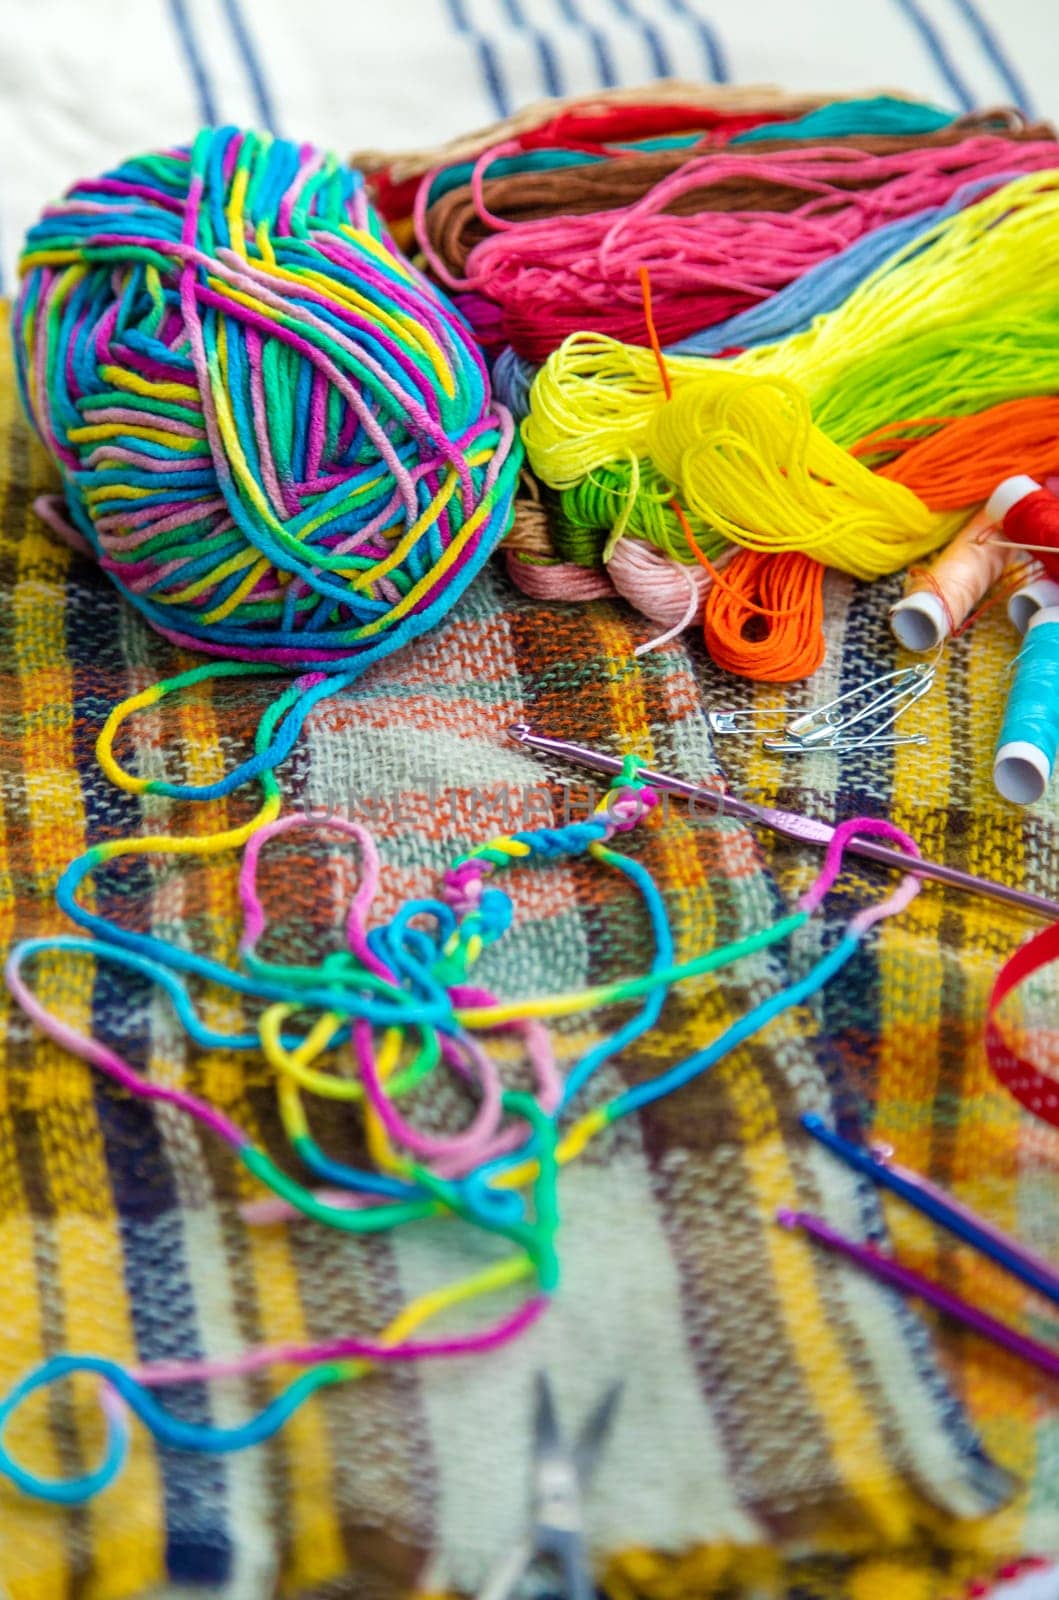 Threads and accessories for sewing and knitting. Selective focus. by yanadjana